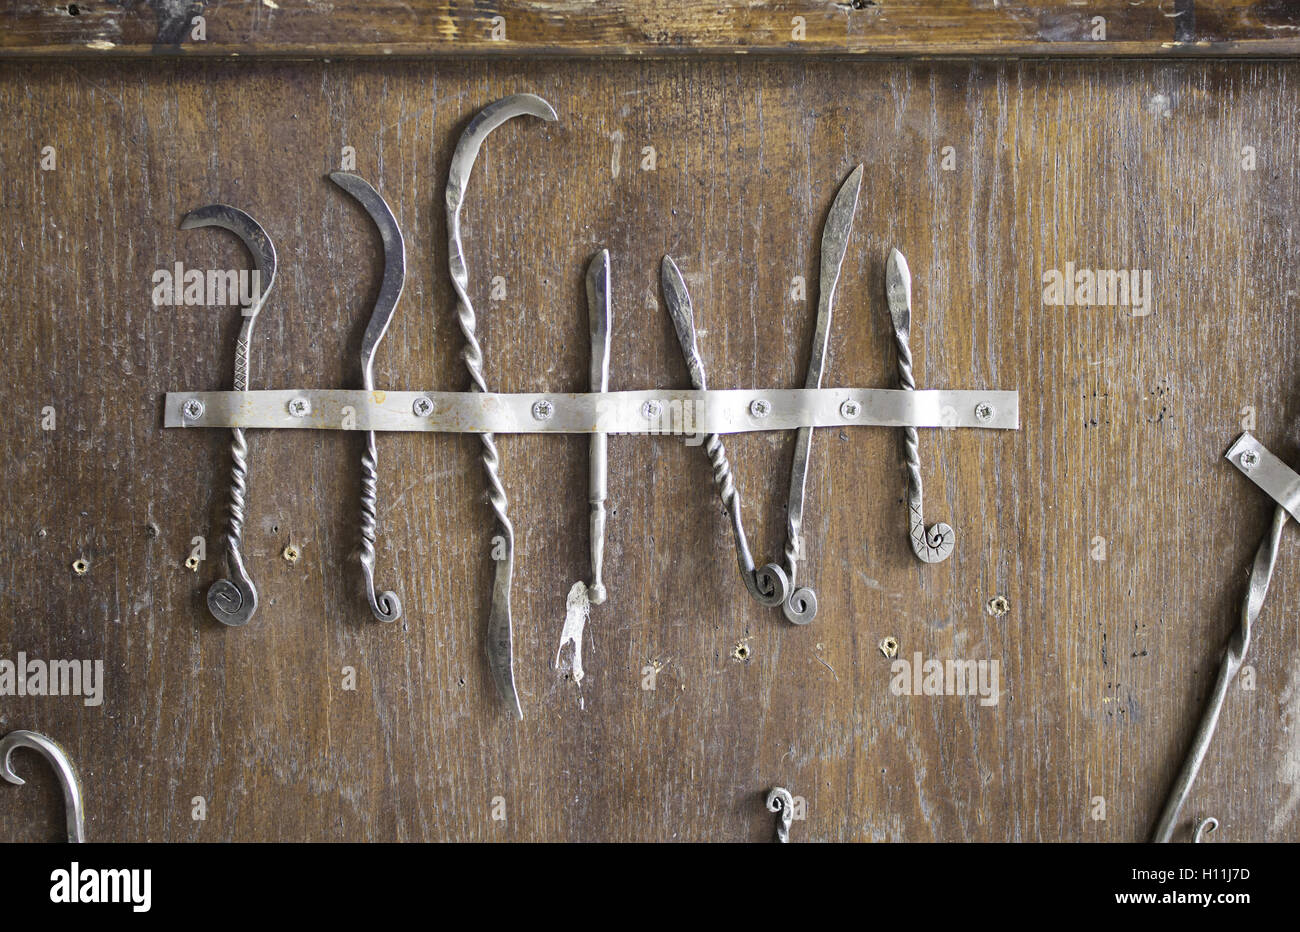 Inquisition old medical instruments and steel saws Stock Photo